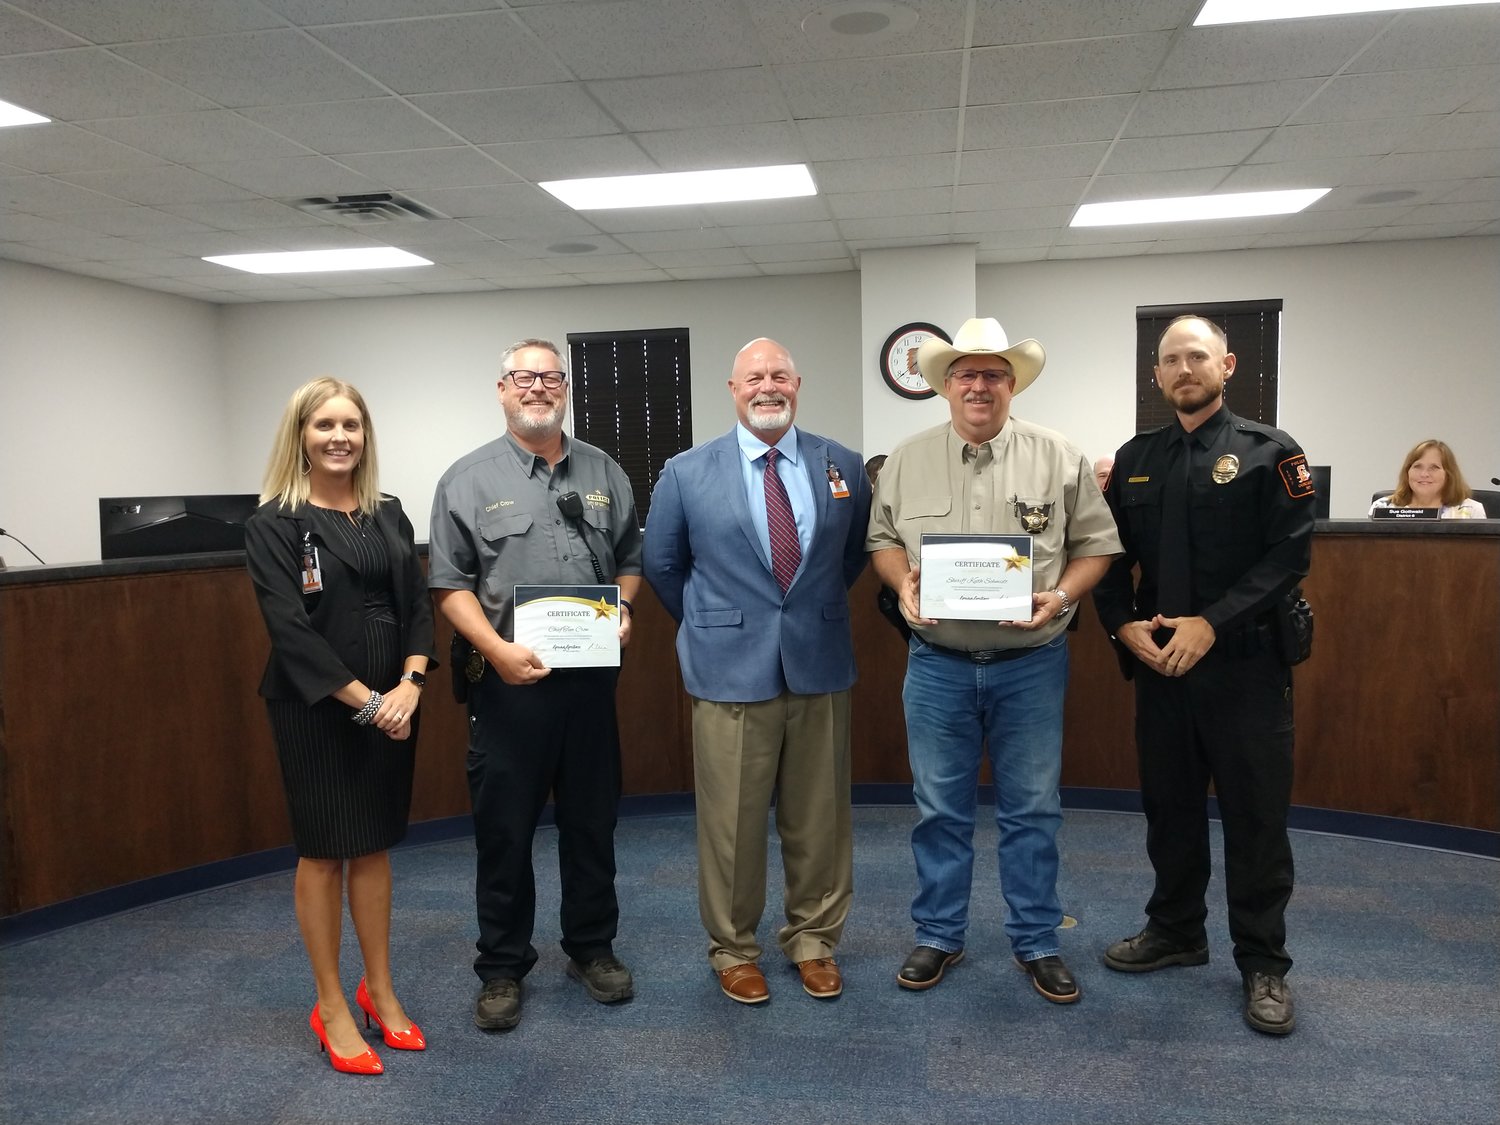 The Gonzales ISD School Board shows their appreciation to the local law enforcement in Gonzales County for their input for the Guardian Program. From Left, GISD’s Robin Trojack, Gonzales Police Chief Tim Crow, GISD’s Gene Kridler, Gonzales County Sheriff Keith Schmidt and GISD Police Chief Ross Gottwald.